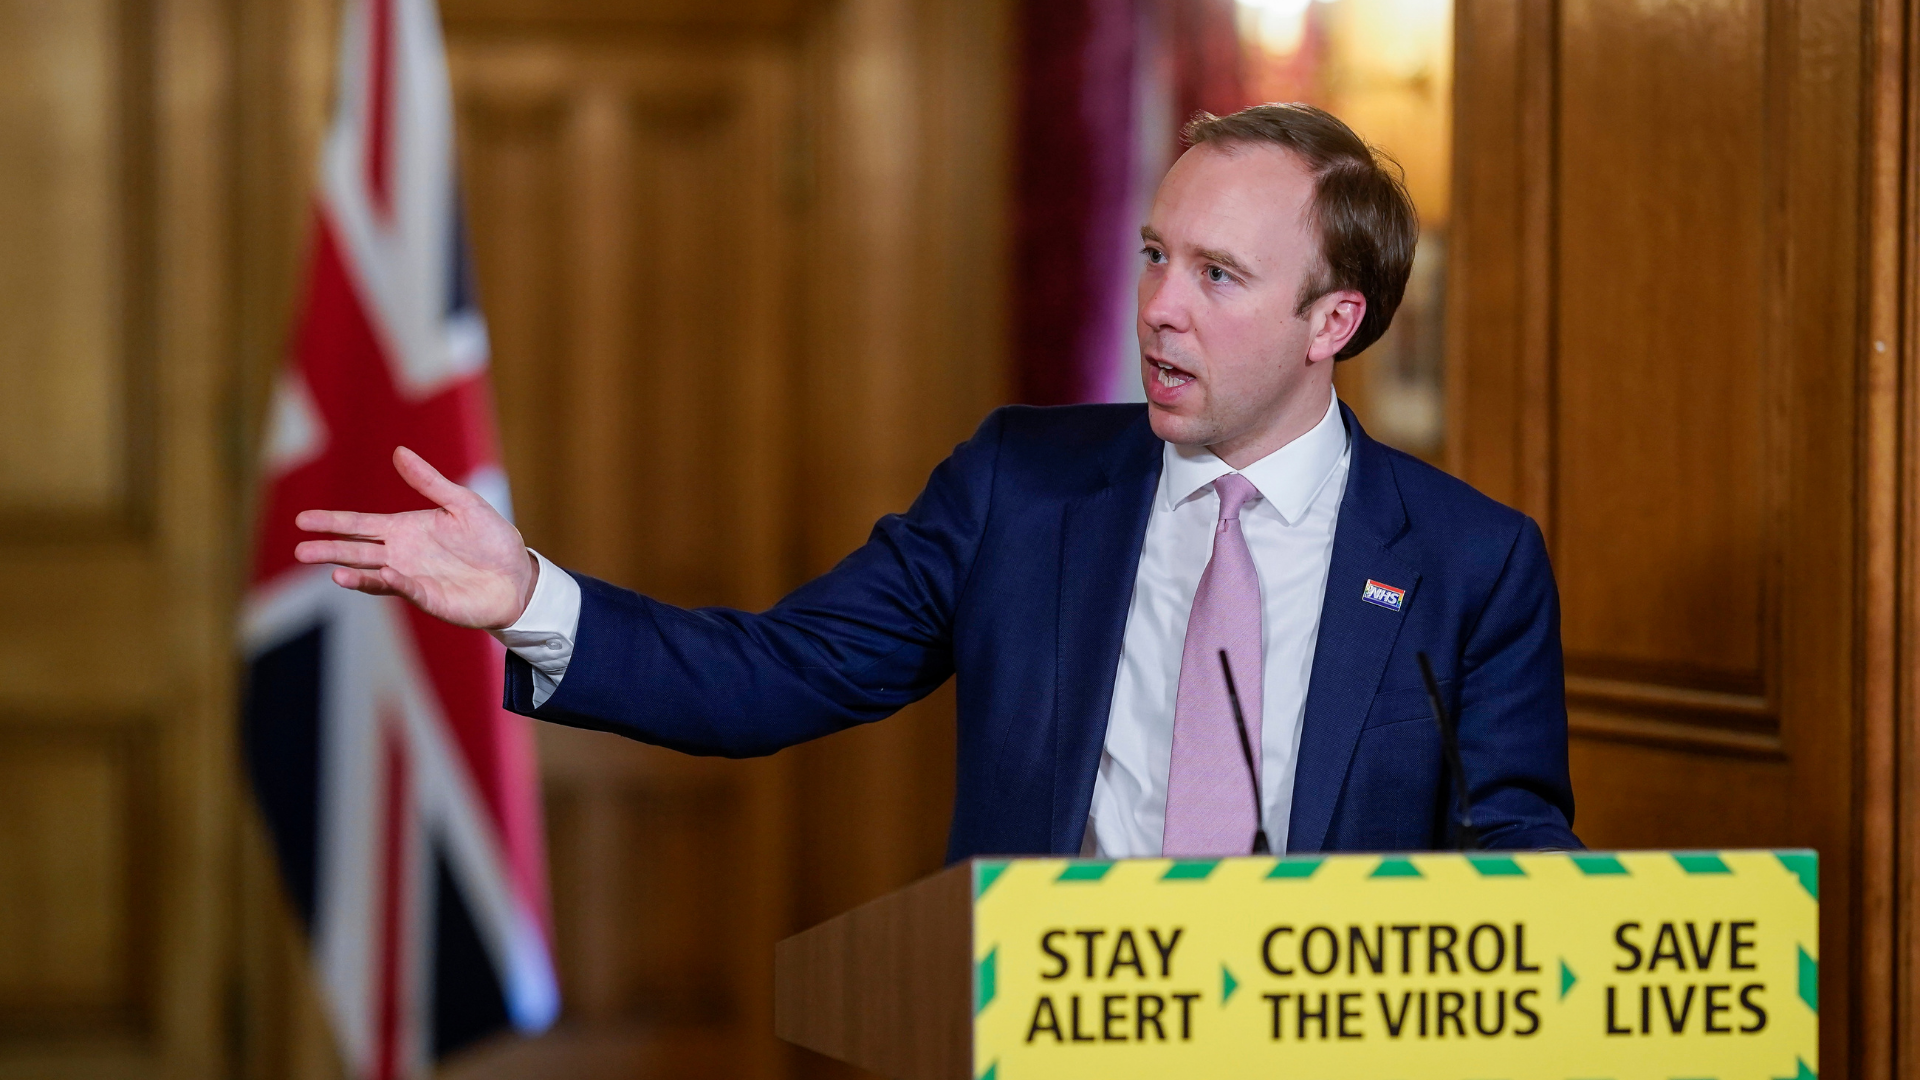 Health Secretary Matt Hancock, who has been accused of breaching the ministerial code. Image credit: Number 10 / Flickr